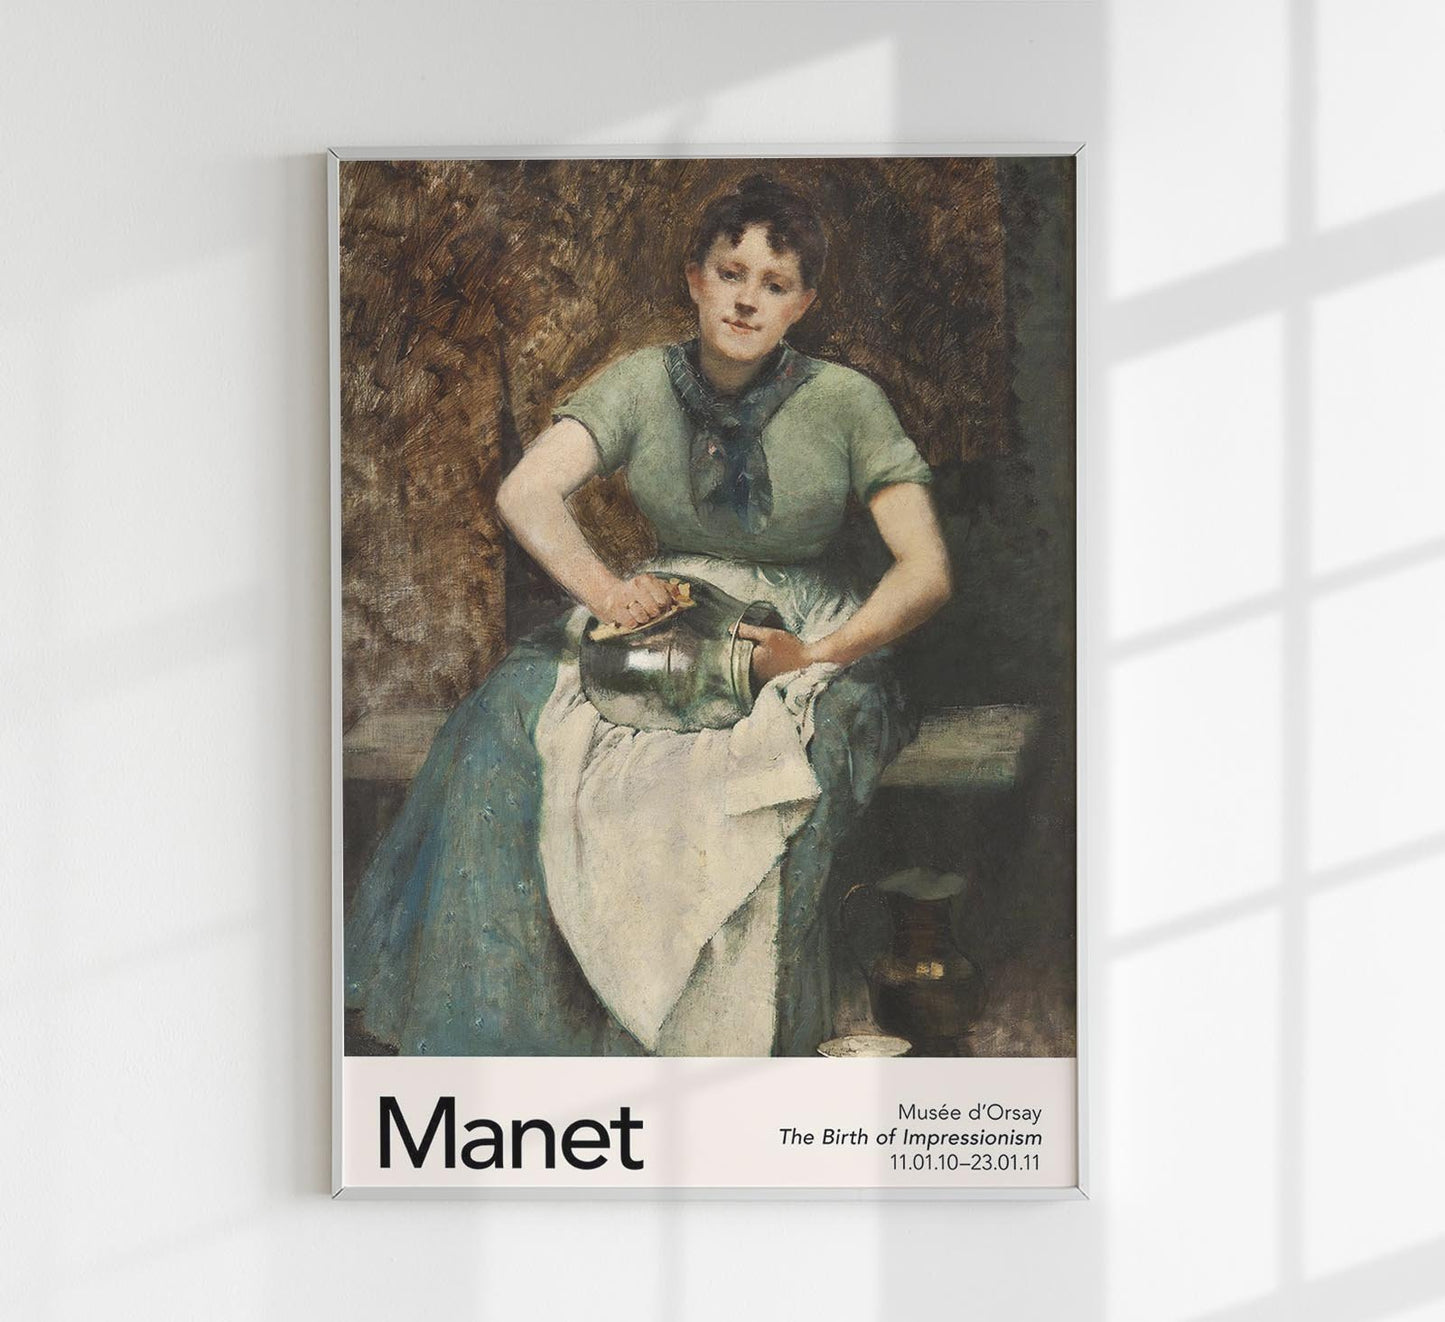 The Servant by Manet Exhibition Poster